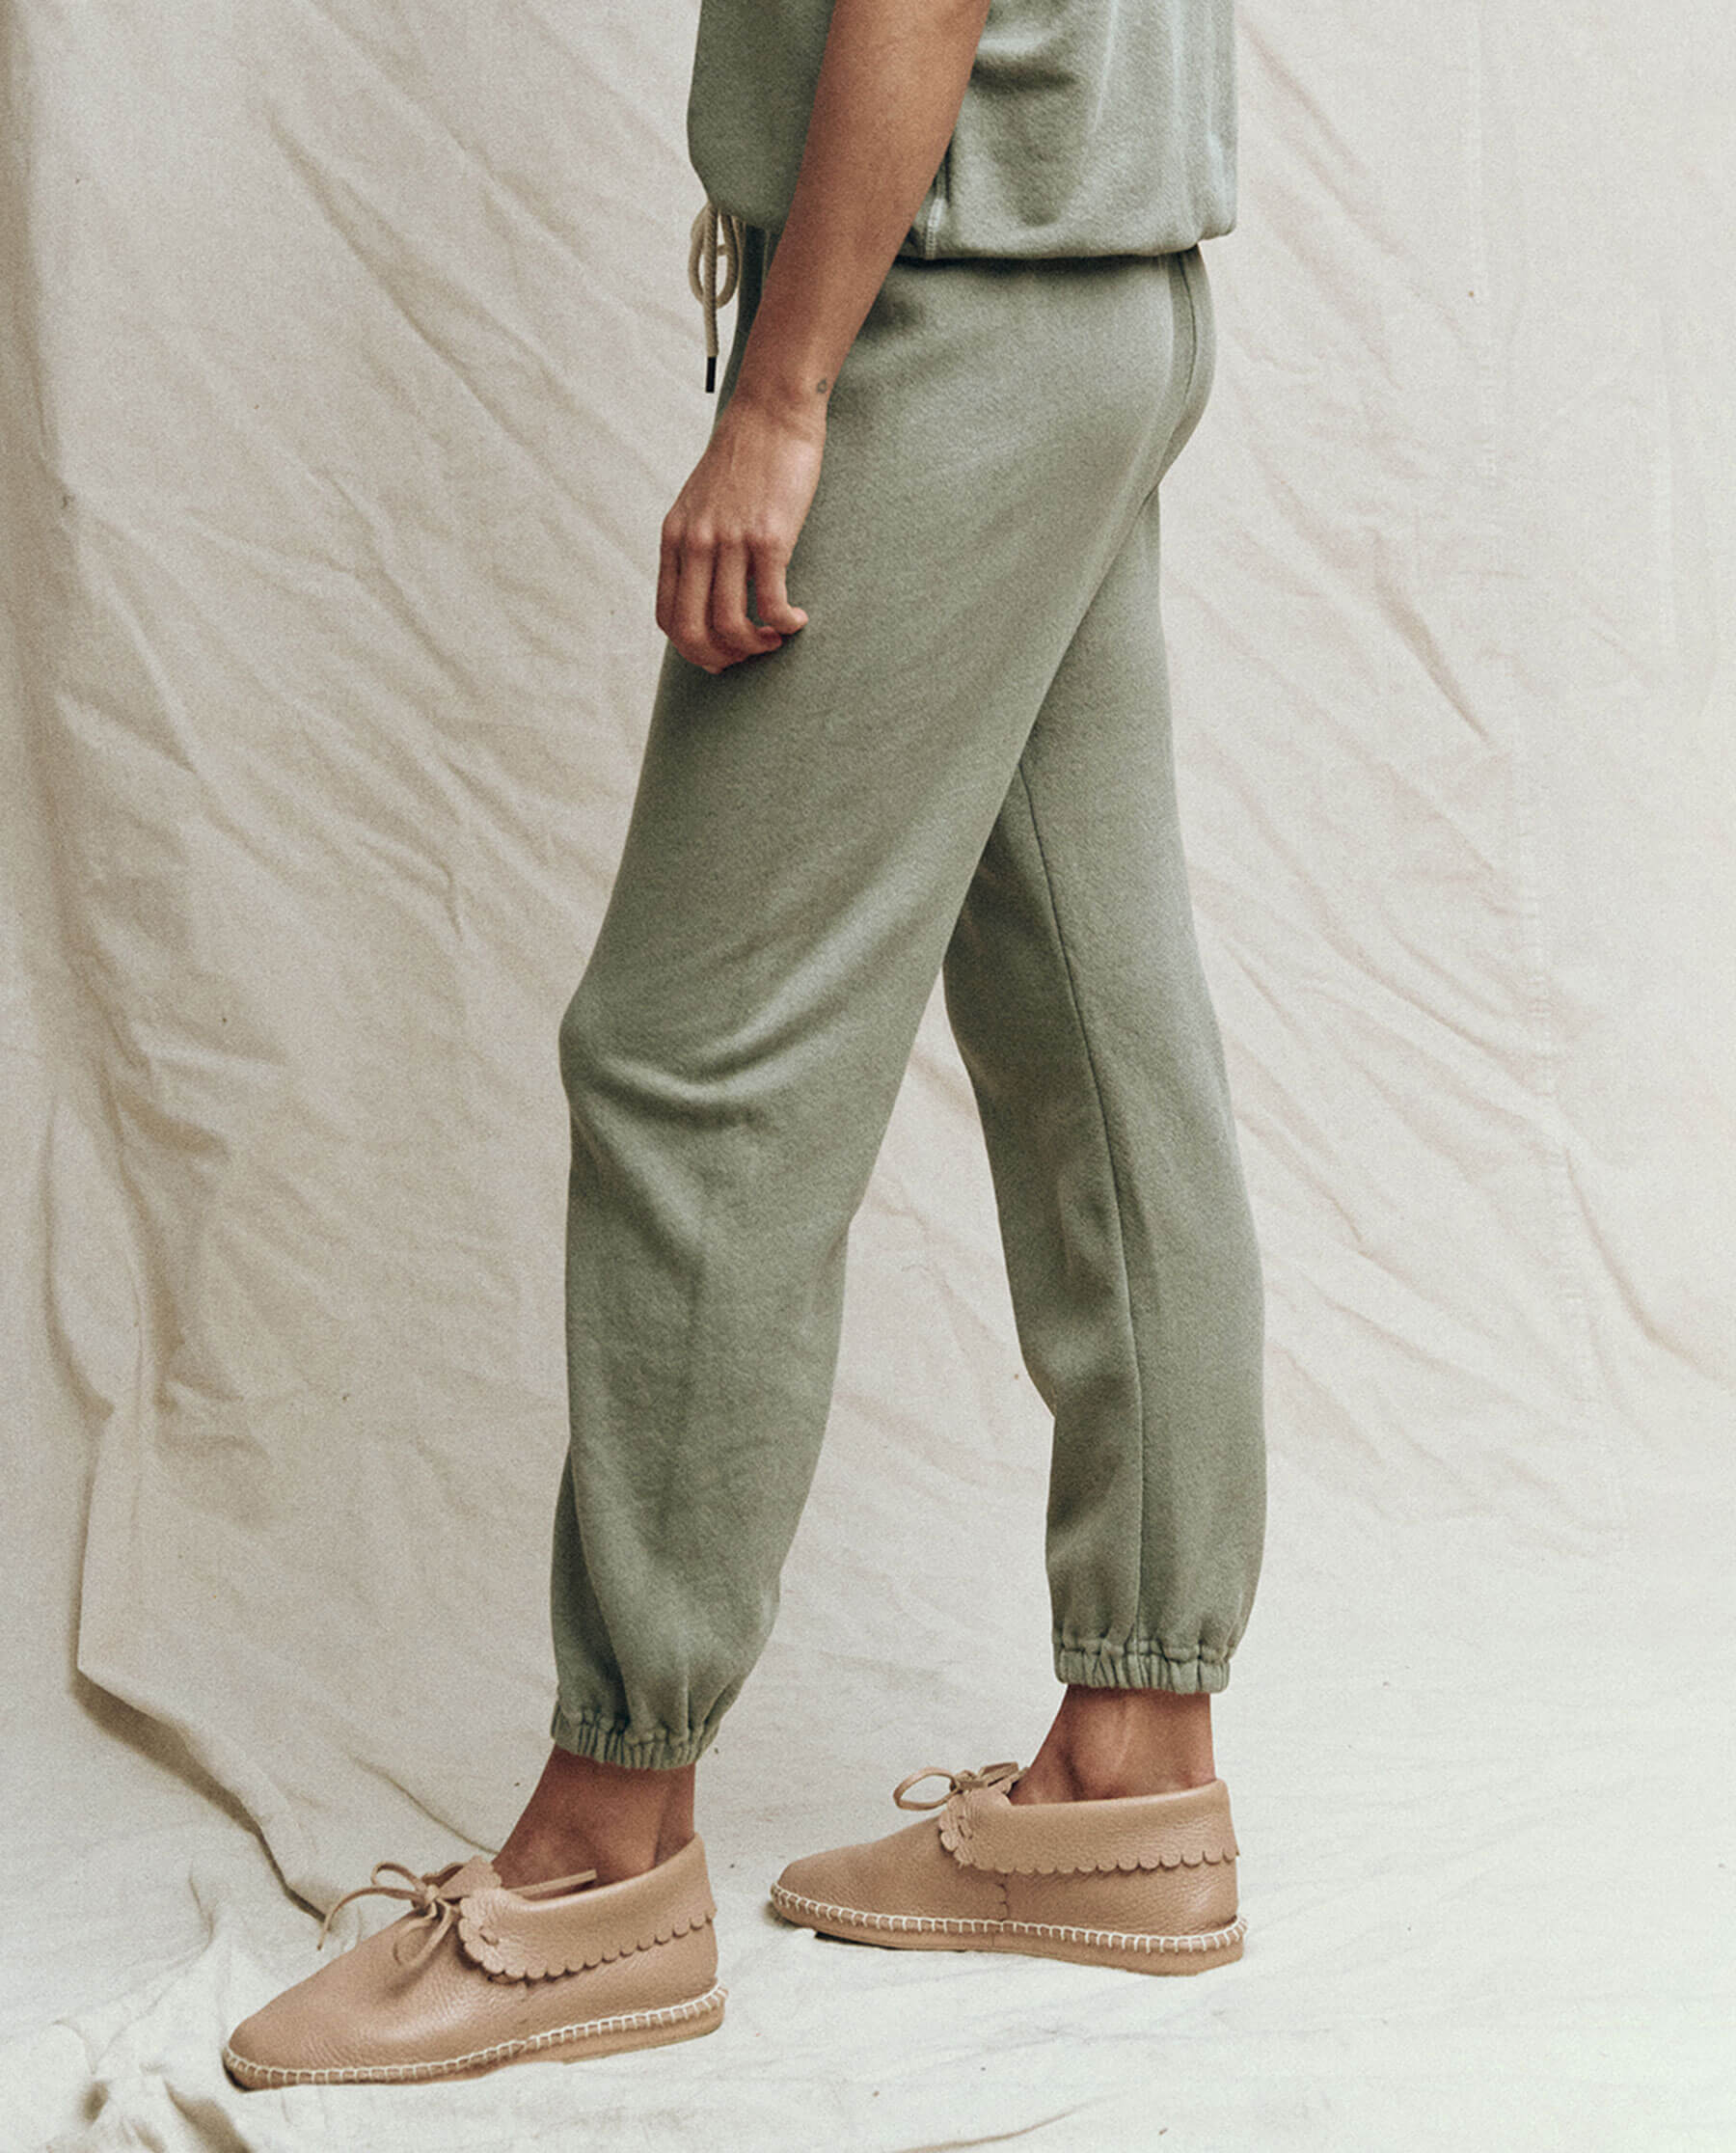 The Stadium Sweatpant. Solid -- Sweetgrass SWEATPANTS THE GREAT. SP23 KNITS